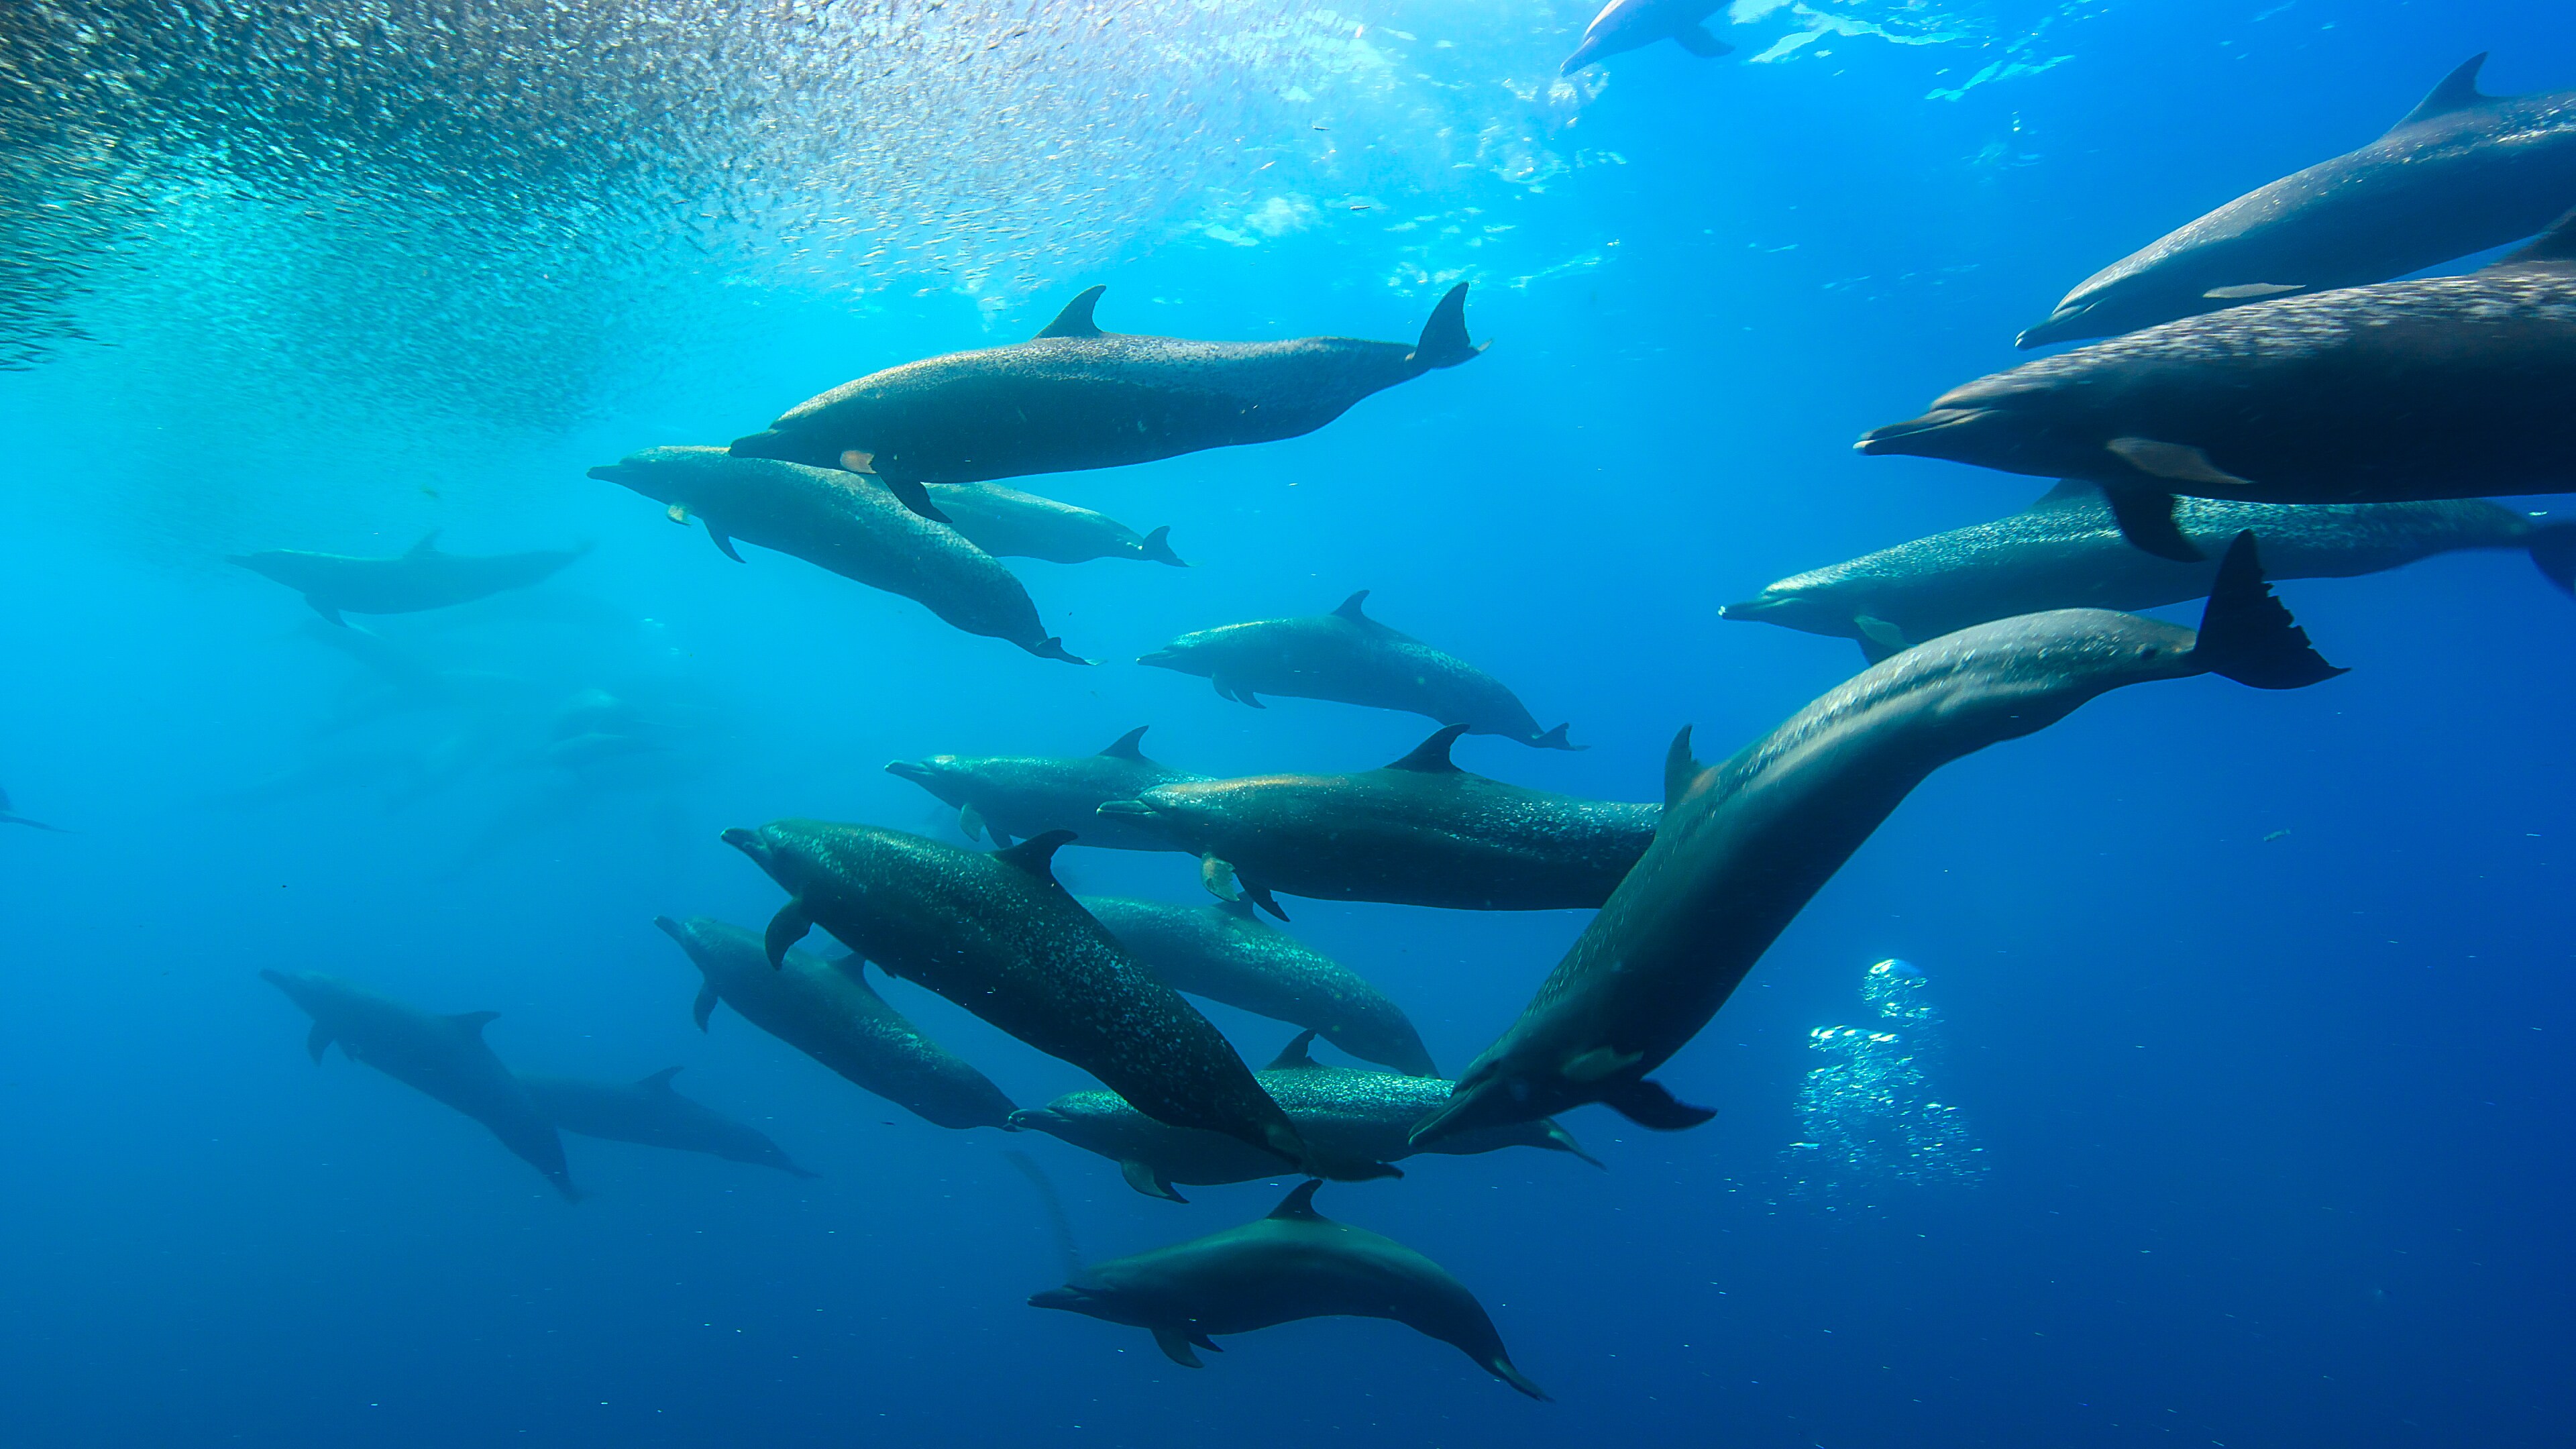 A pod of spotted dolphins. (Credit: National Geographic/Johnny Rogers for Disney+)